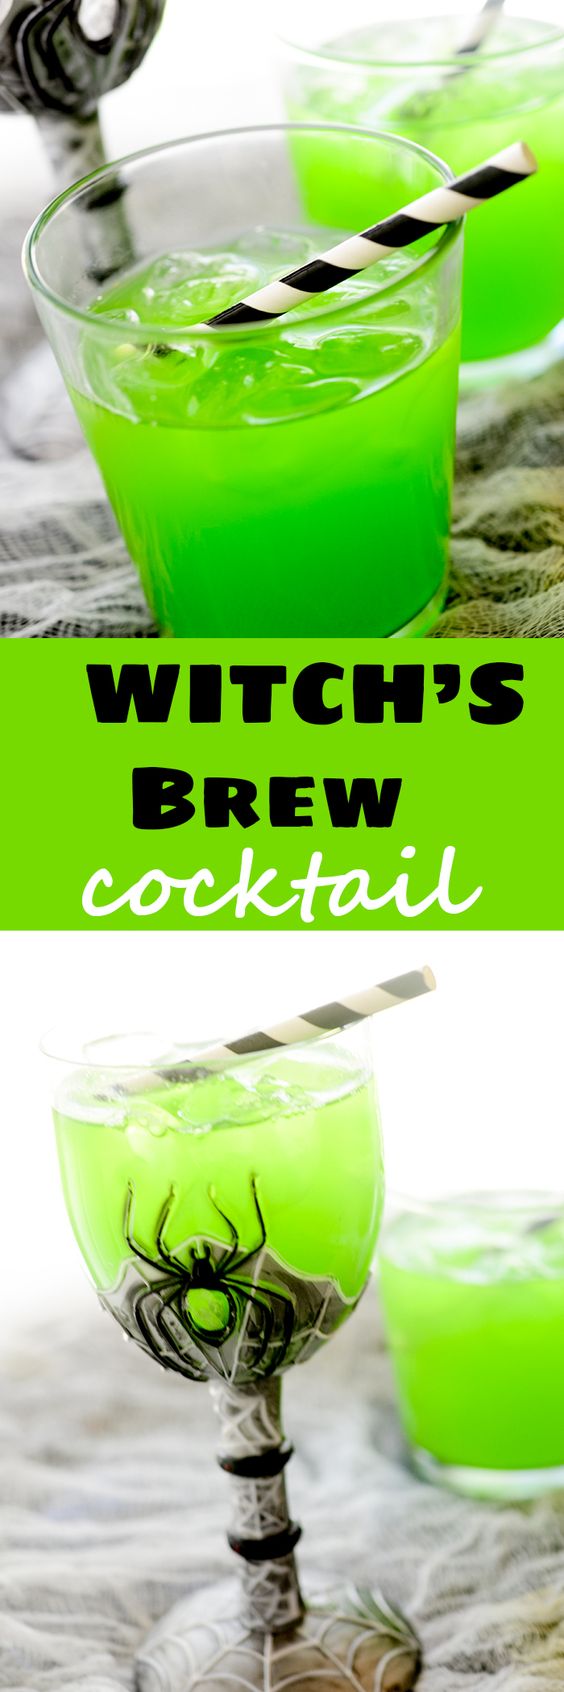 12. Witch's Brew Cocktail